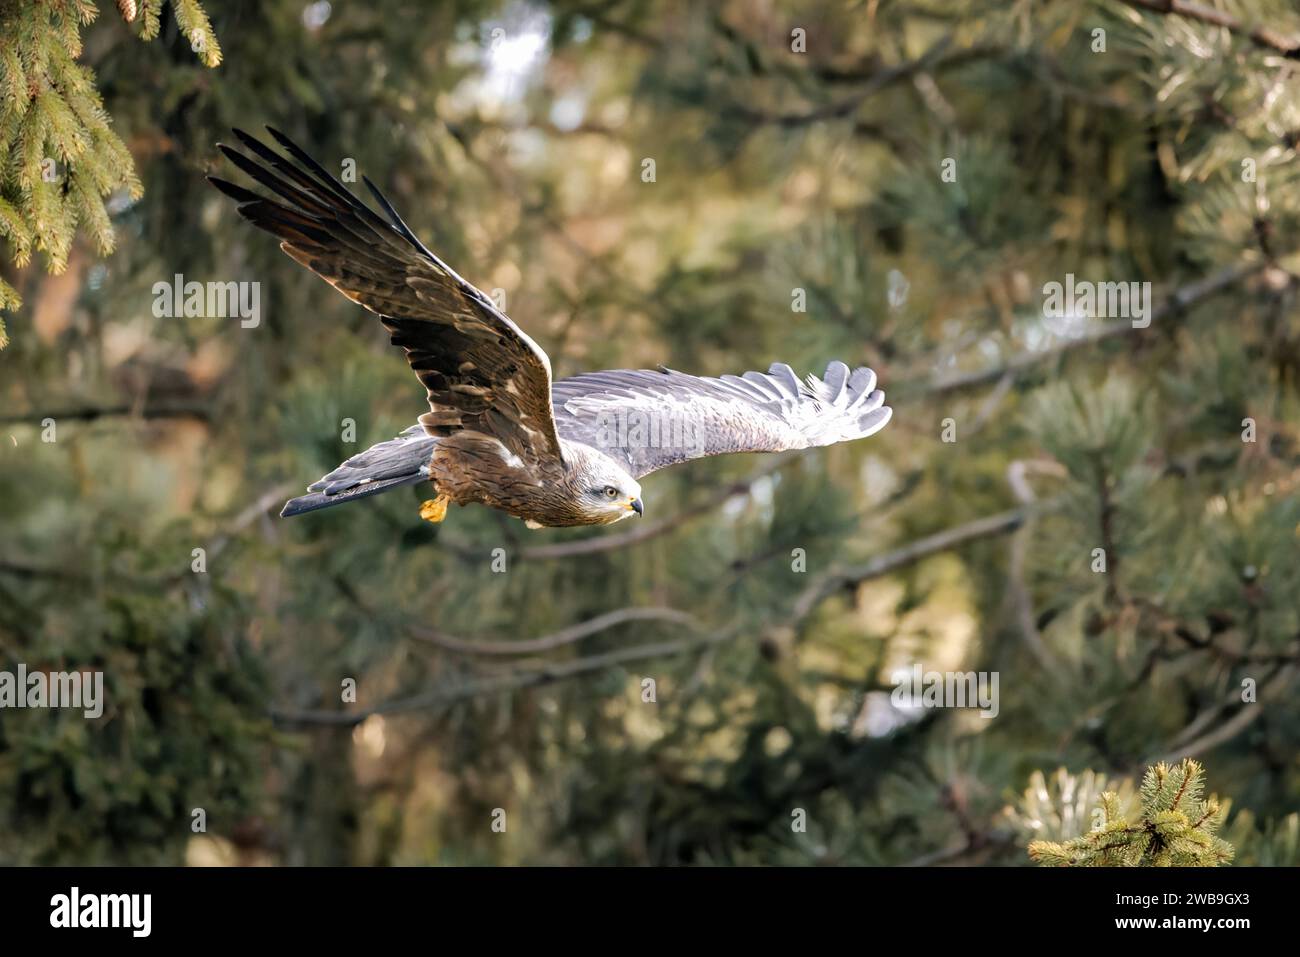 A closeup of a hawk soaring through a pine forest Stock Photo